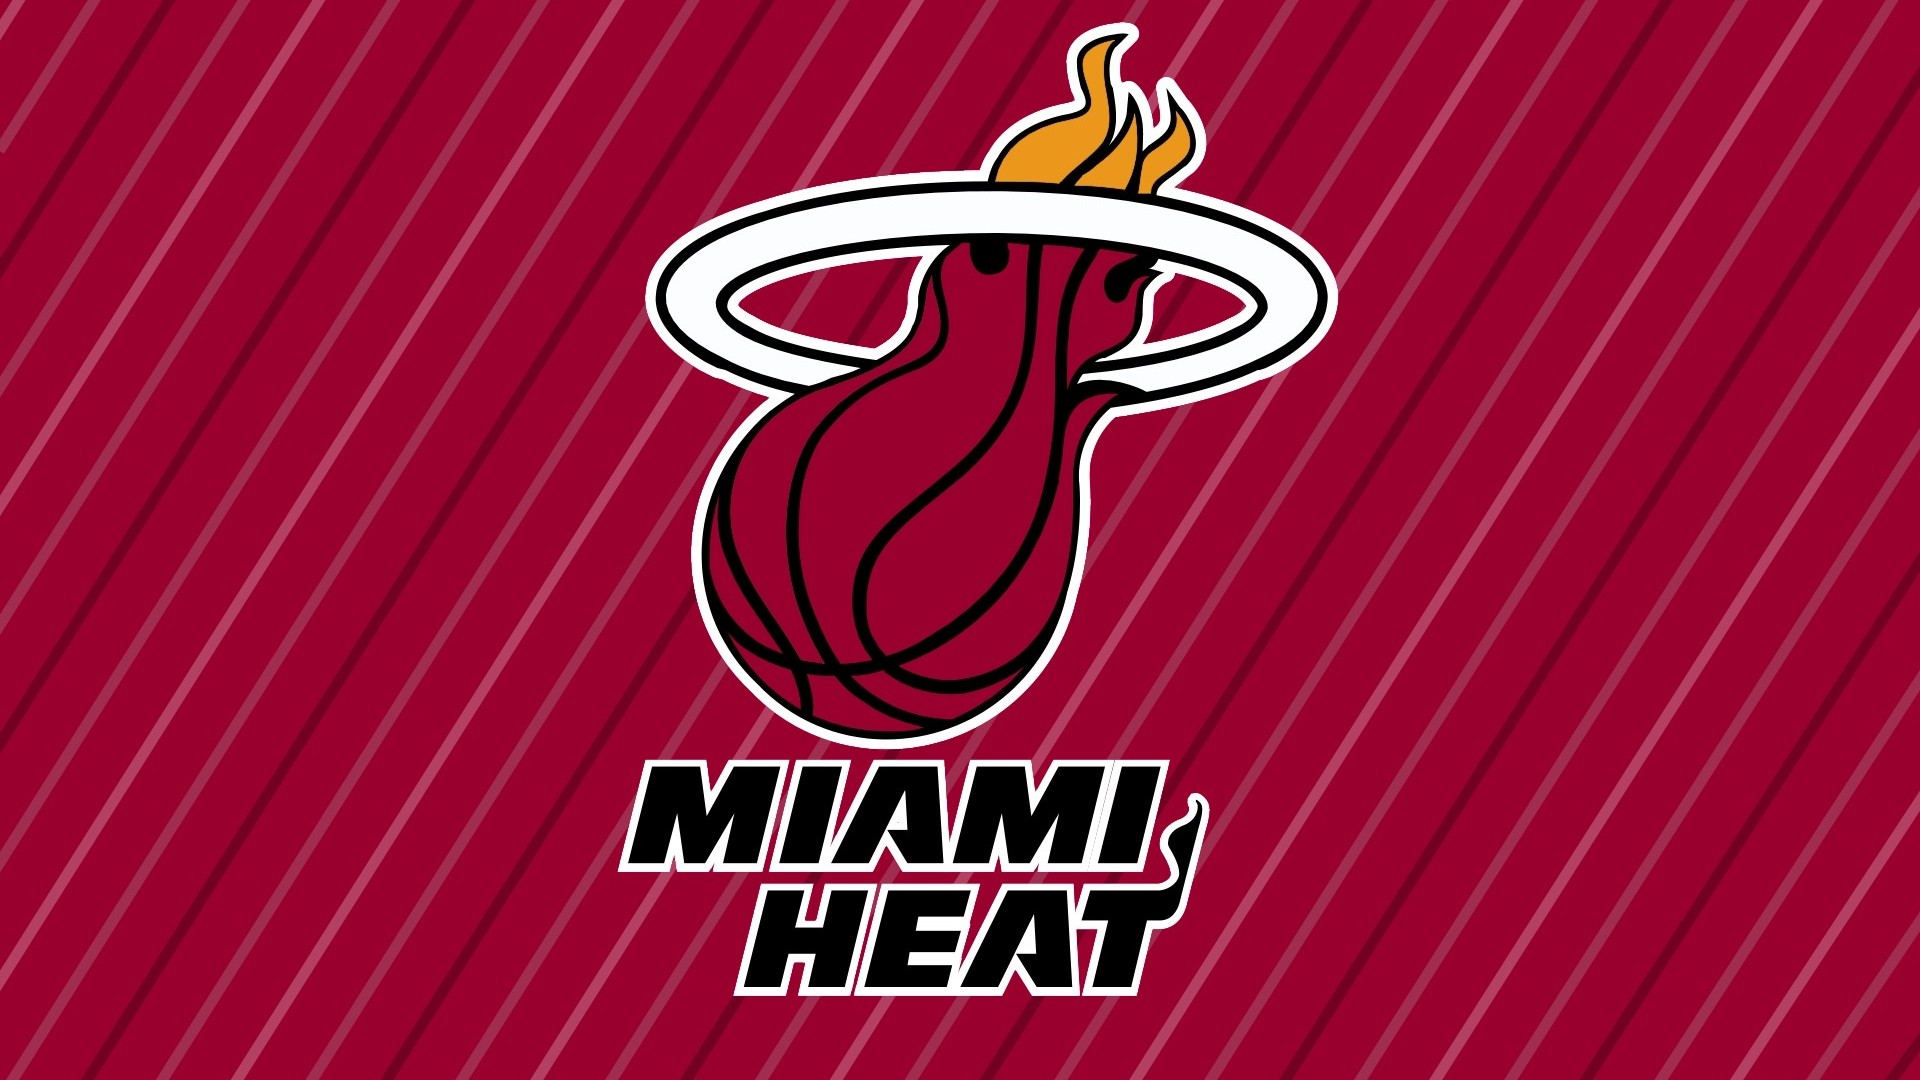 Wallpapers HD Miami Heat with high-resolution 1920x1080 pixel. You can use this wallpaper for your Desktop Computer Backgrounds, Windows or Mac Screensavers, iPhone Lock screen, Tablet or Android and another Mobile Phone device